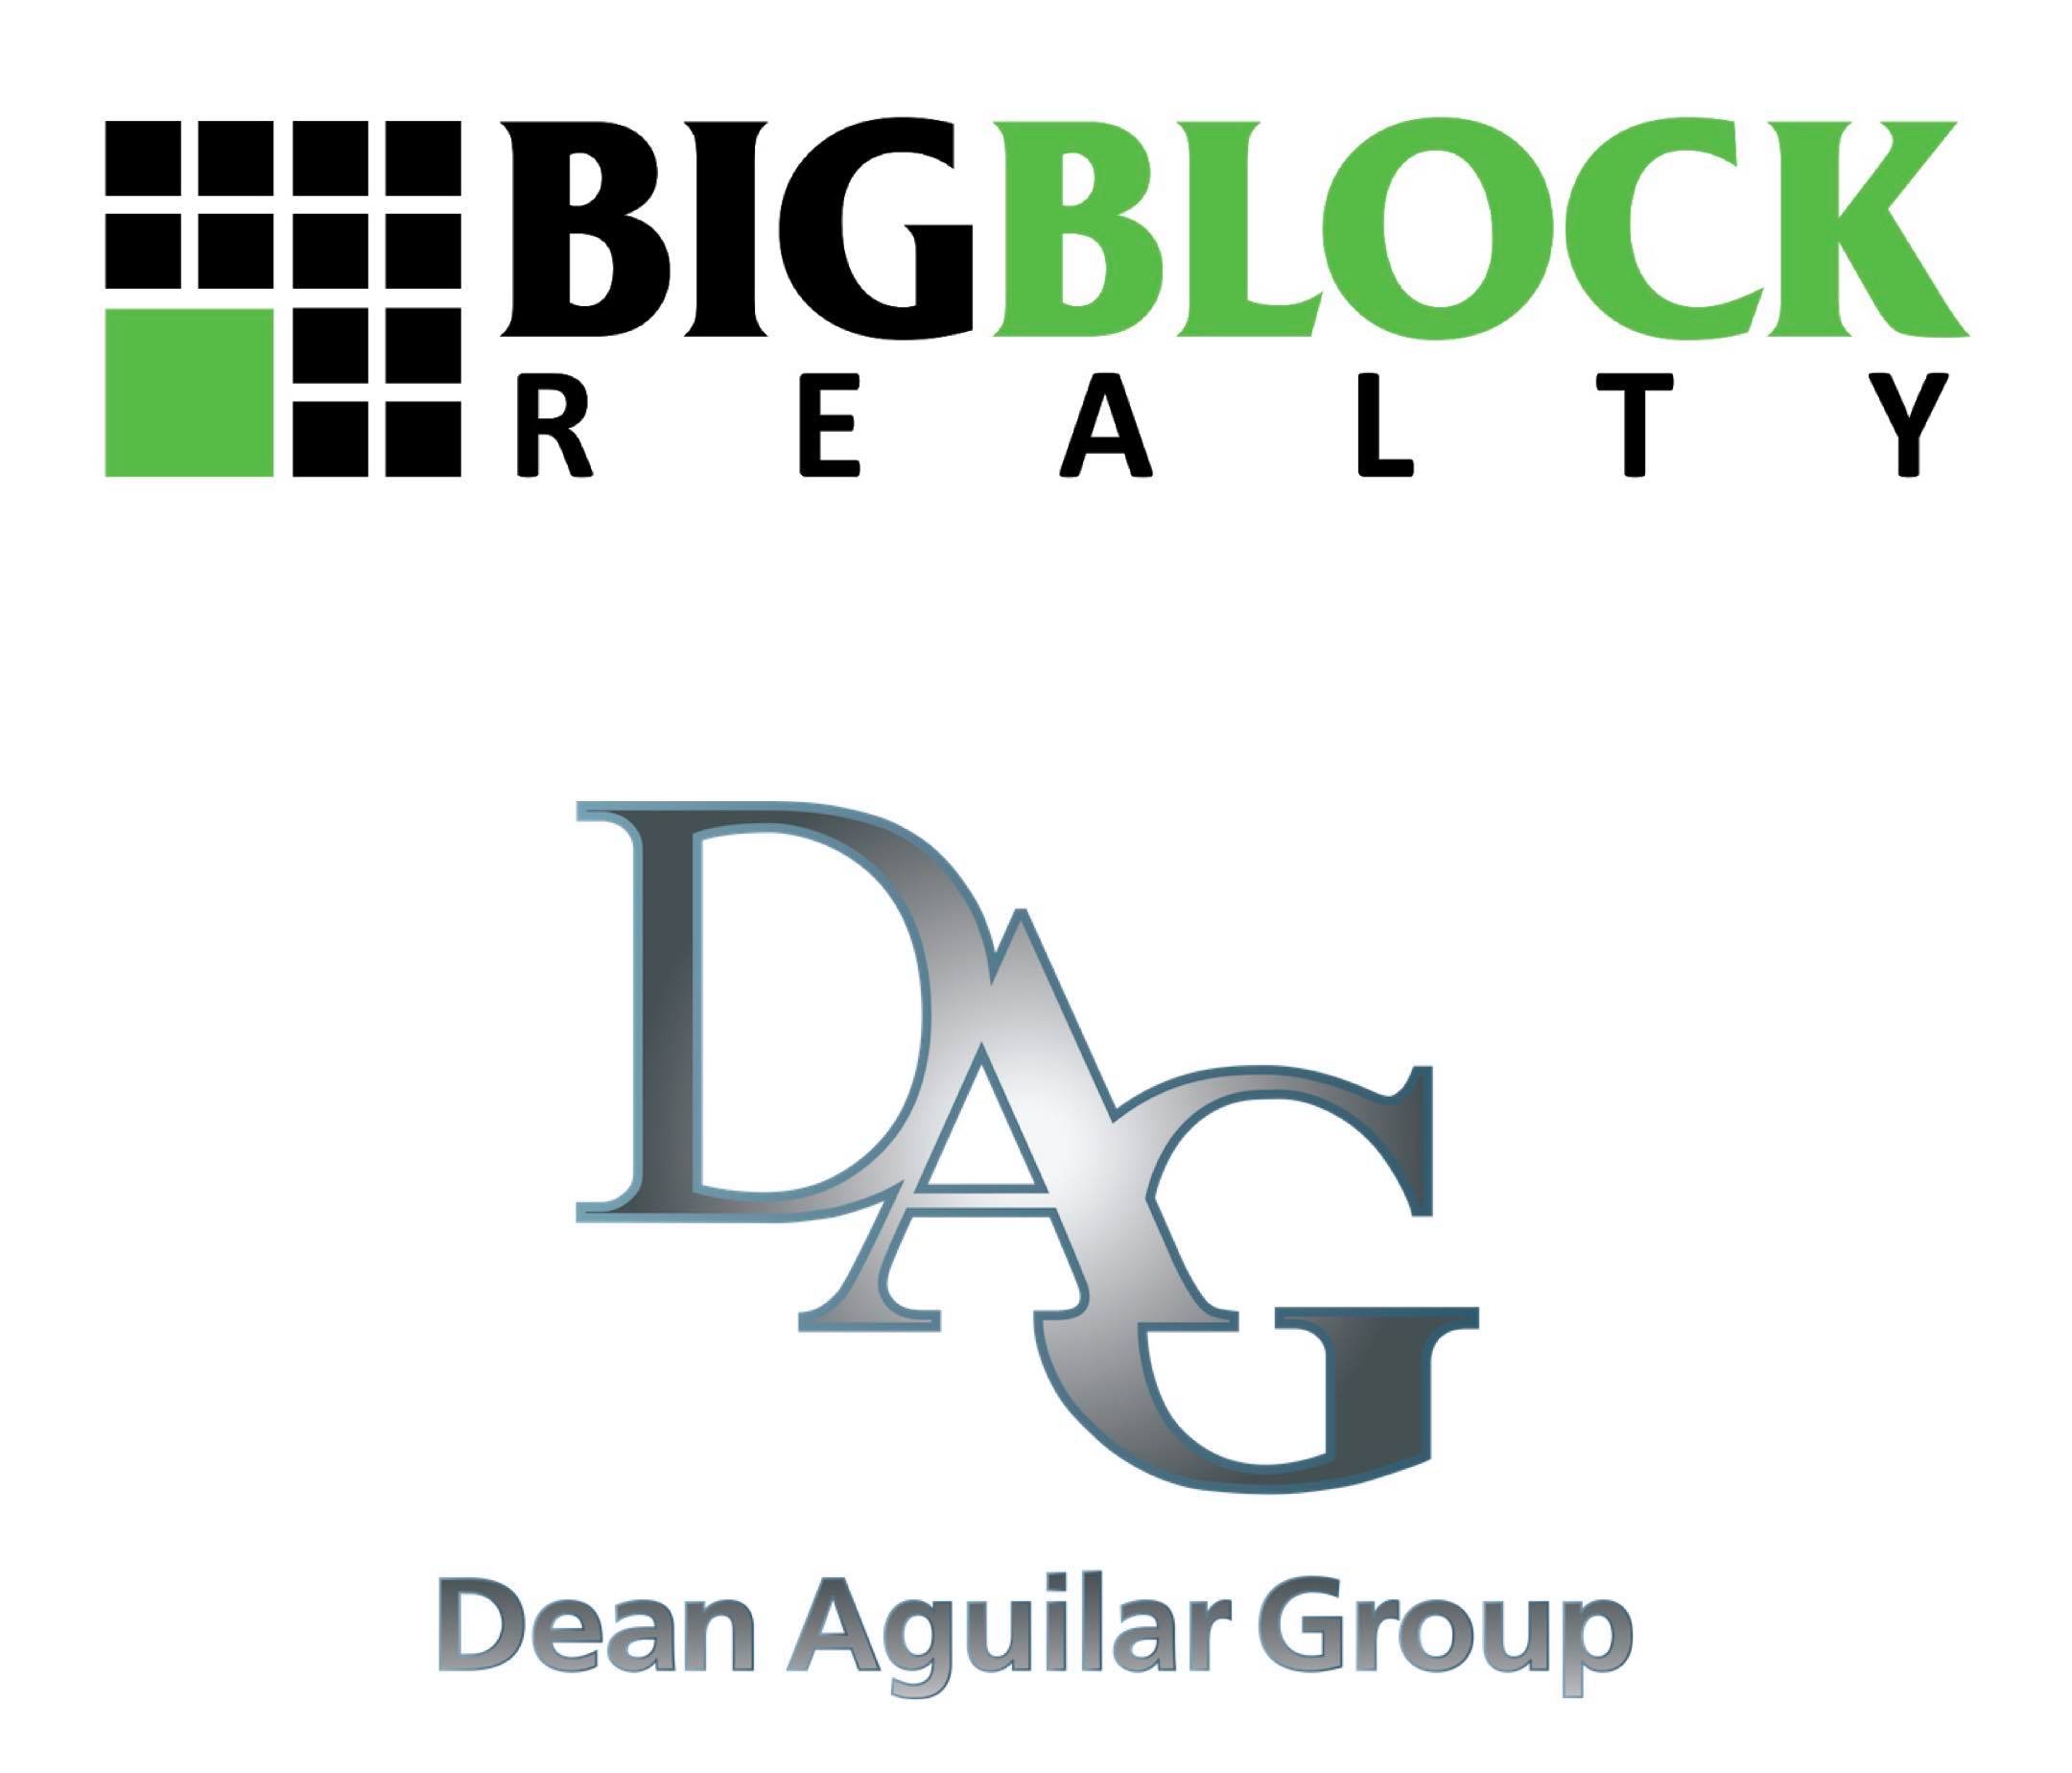 Big Block Realty, Thursday, January 9, 2020, Press release picture